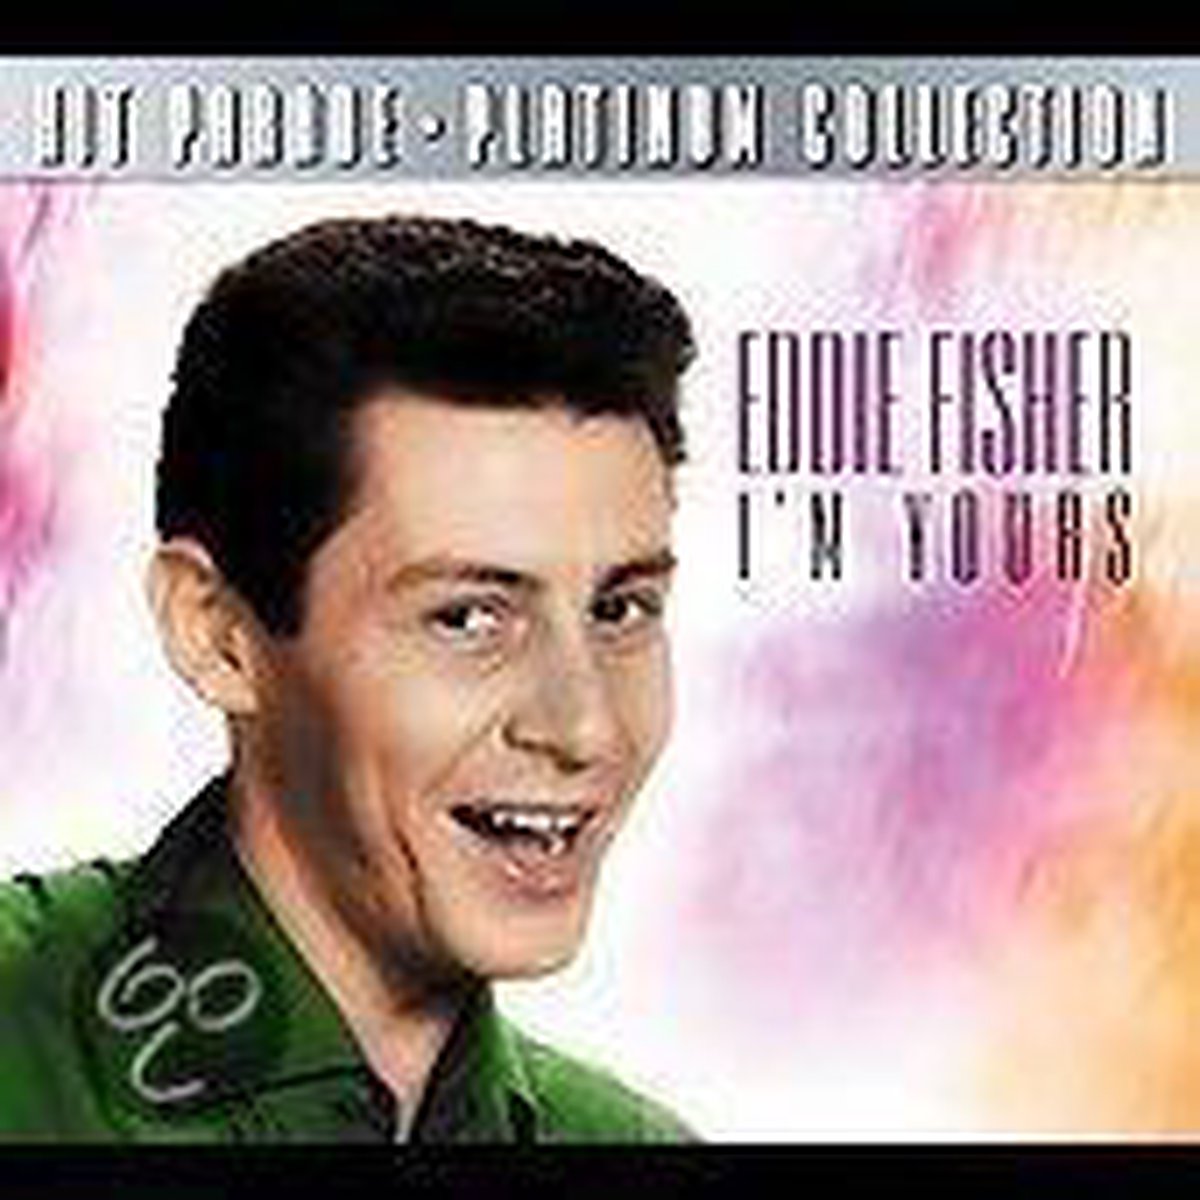 I'M Yours - Eddie Fisher